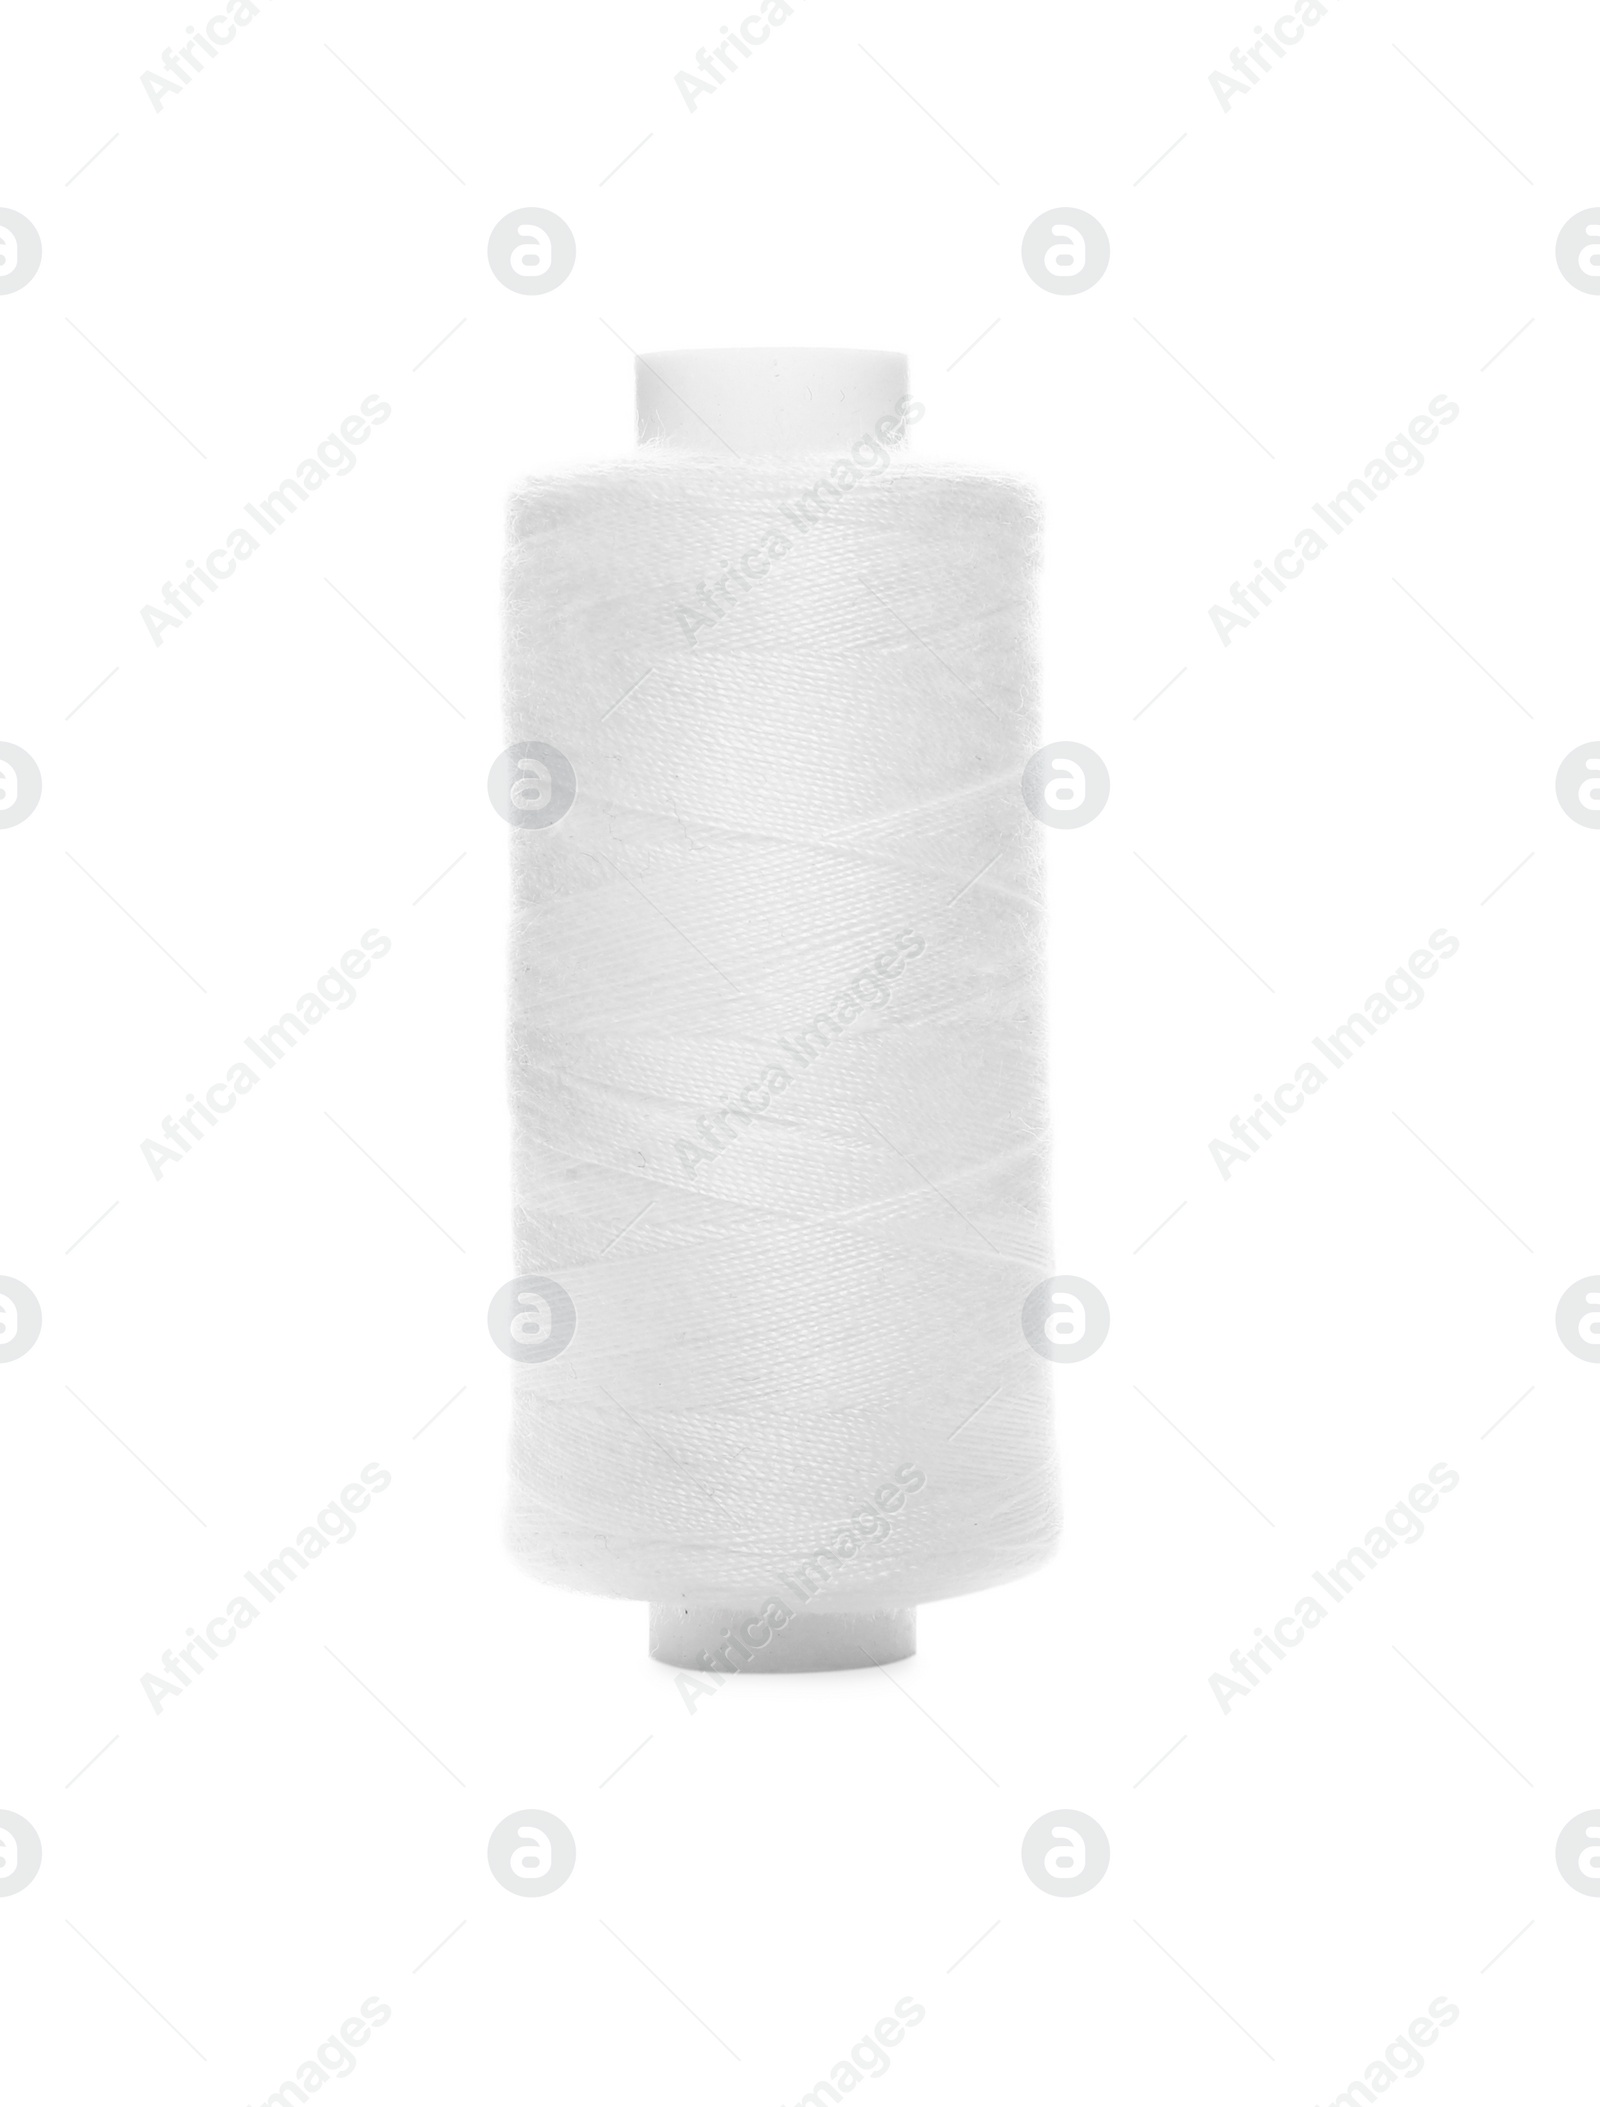 Photo of Spool of sewing thread isolated on white